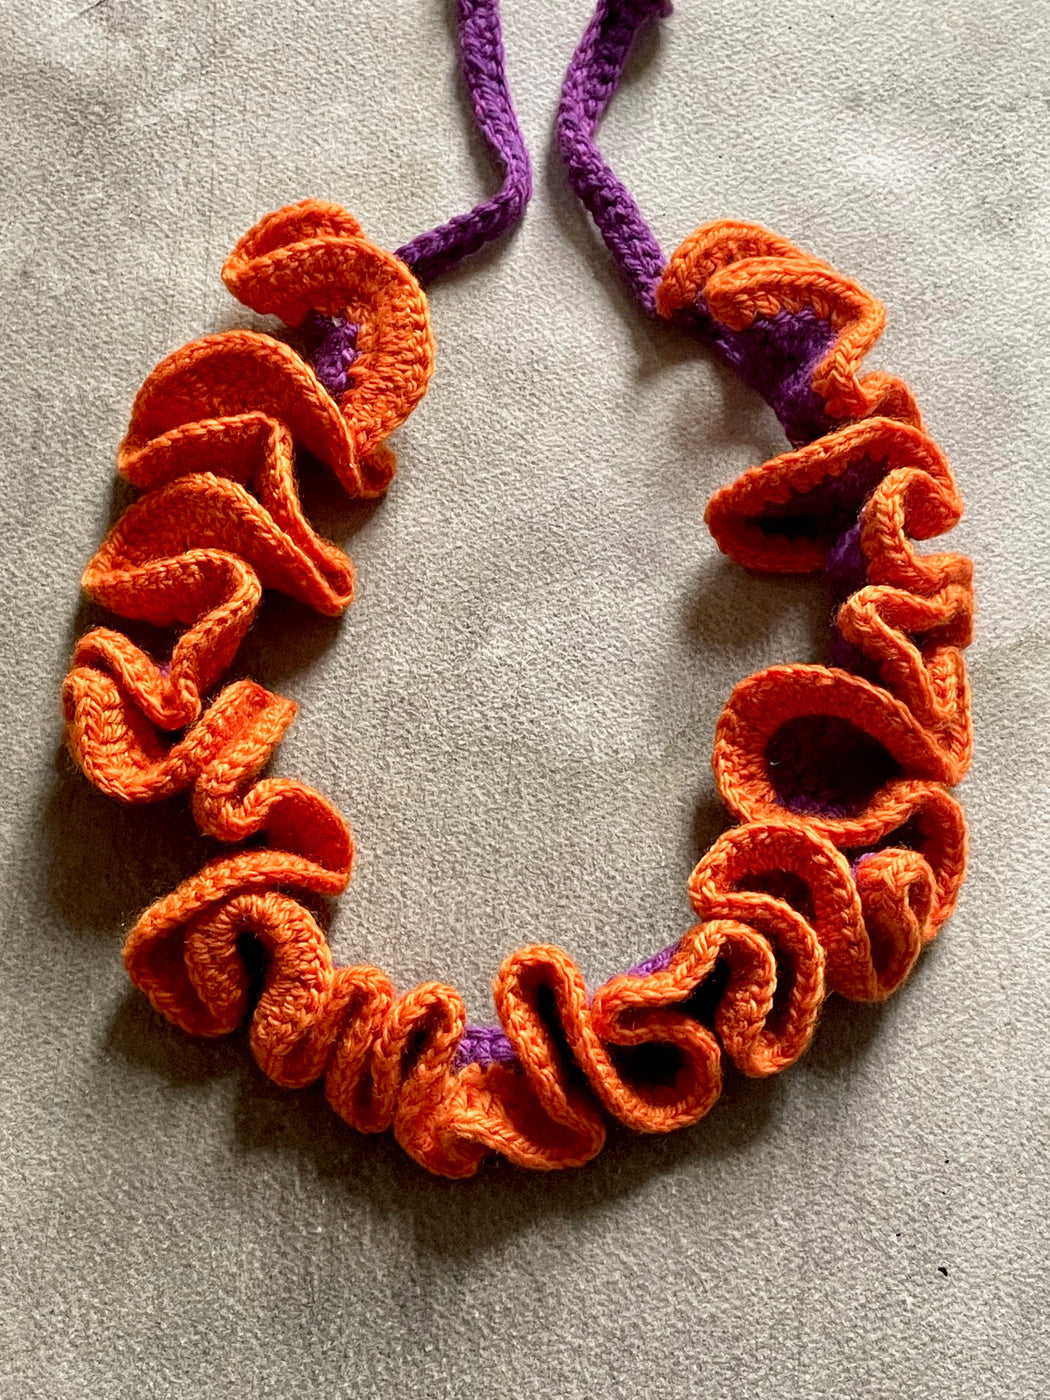 "Ruffle" Hand-Crocheted Necklace by Albo - Tiger Lily